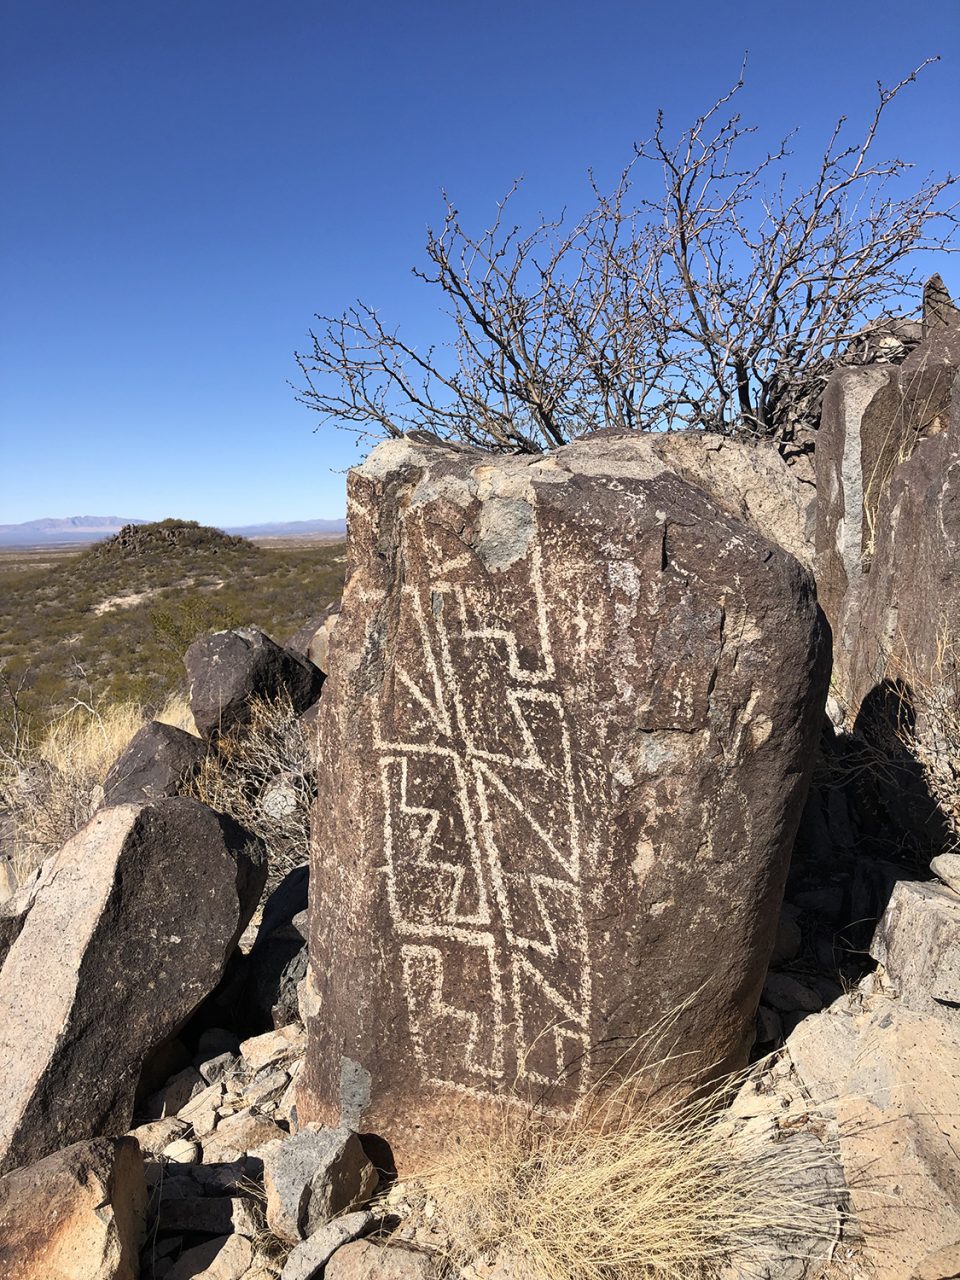 Abstract patterns at Three Rivers Petroglyph Site in New Mexico. Photograph by Keith Dotson. Copyright 2022.